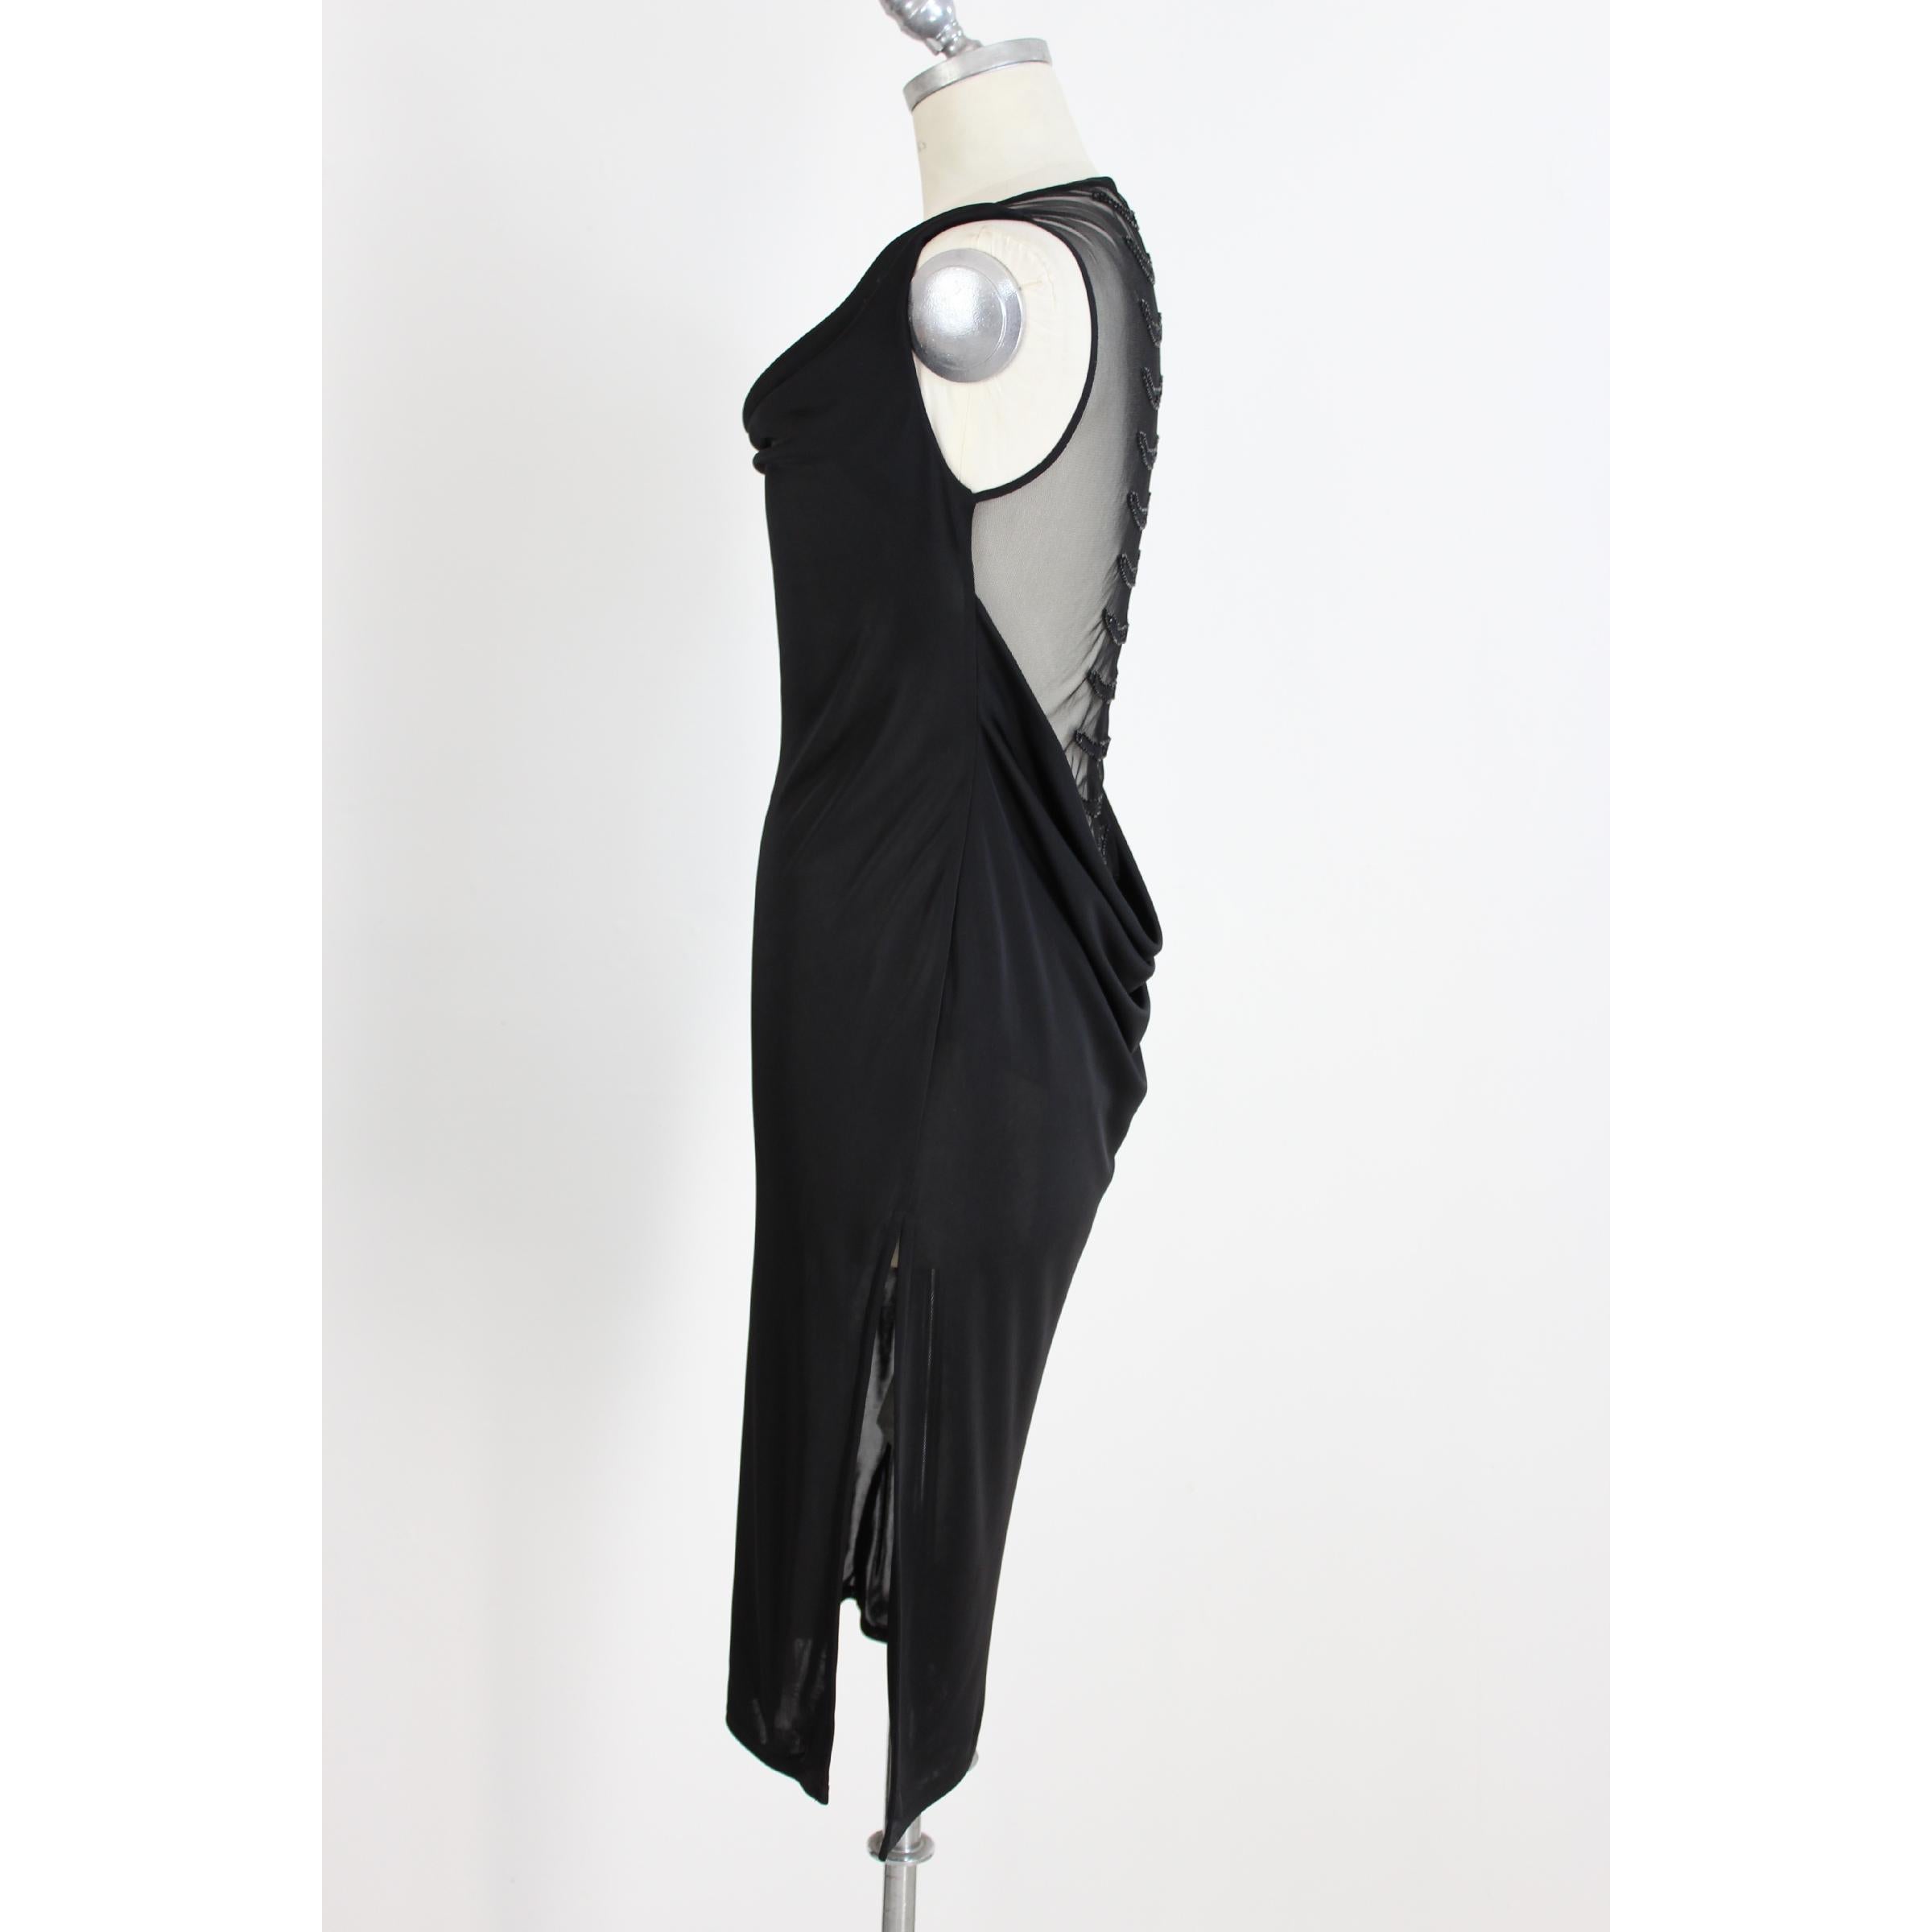 Richmond Black Sequins Transparent Long Evening Dress In Excellent Condition For Sale In Brindisi, Bt